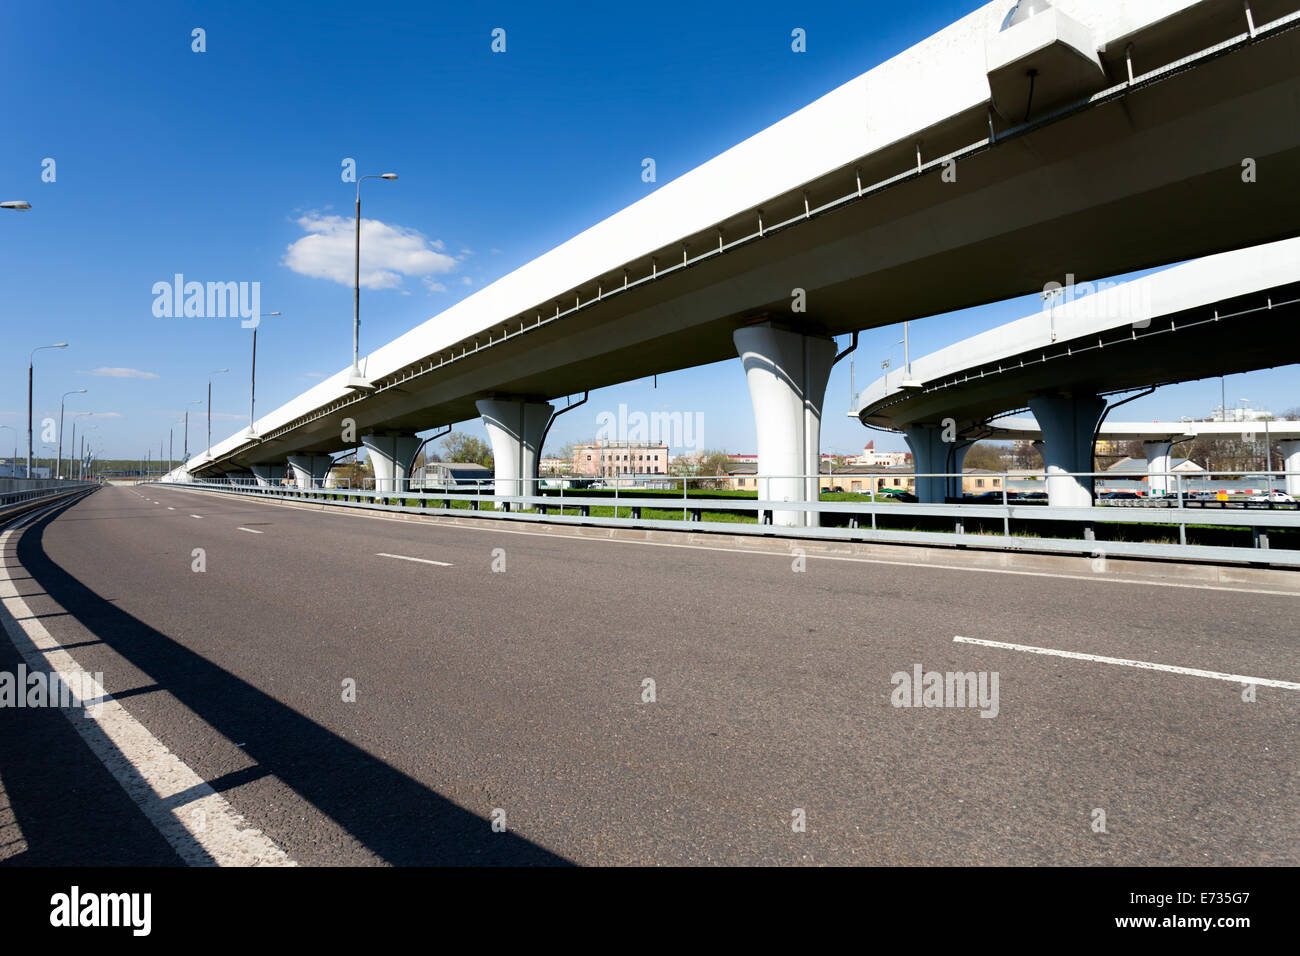 Elevated roads at sunny day Stock Photo